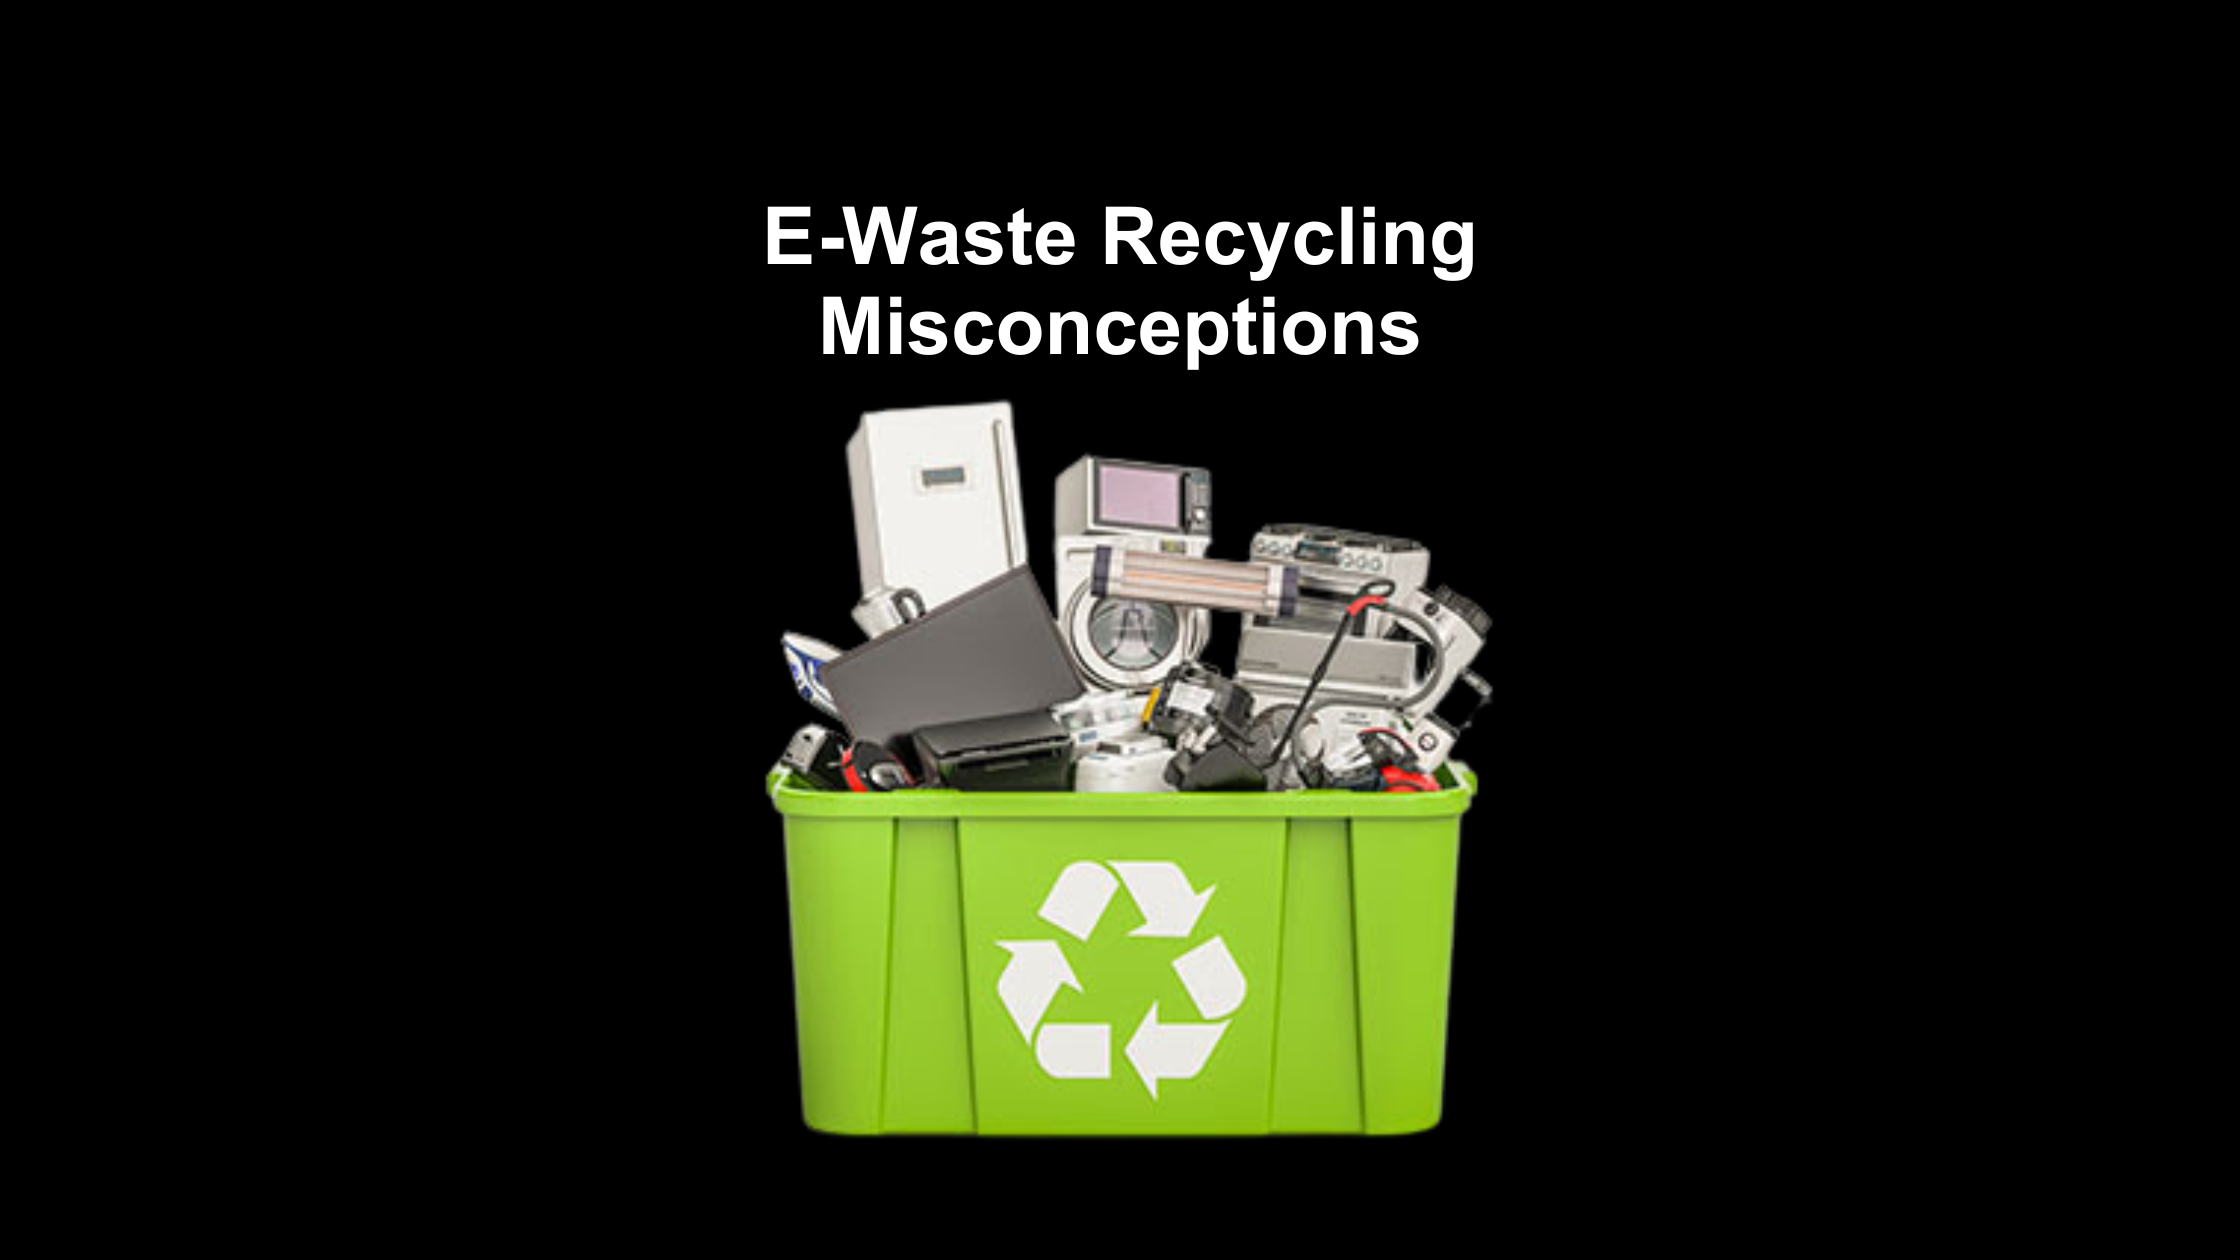 Top 10 E-Waste Recycling Misconceptions